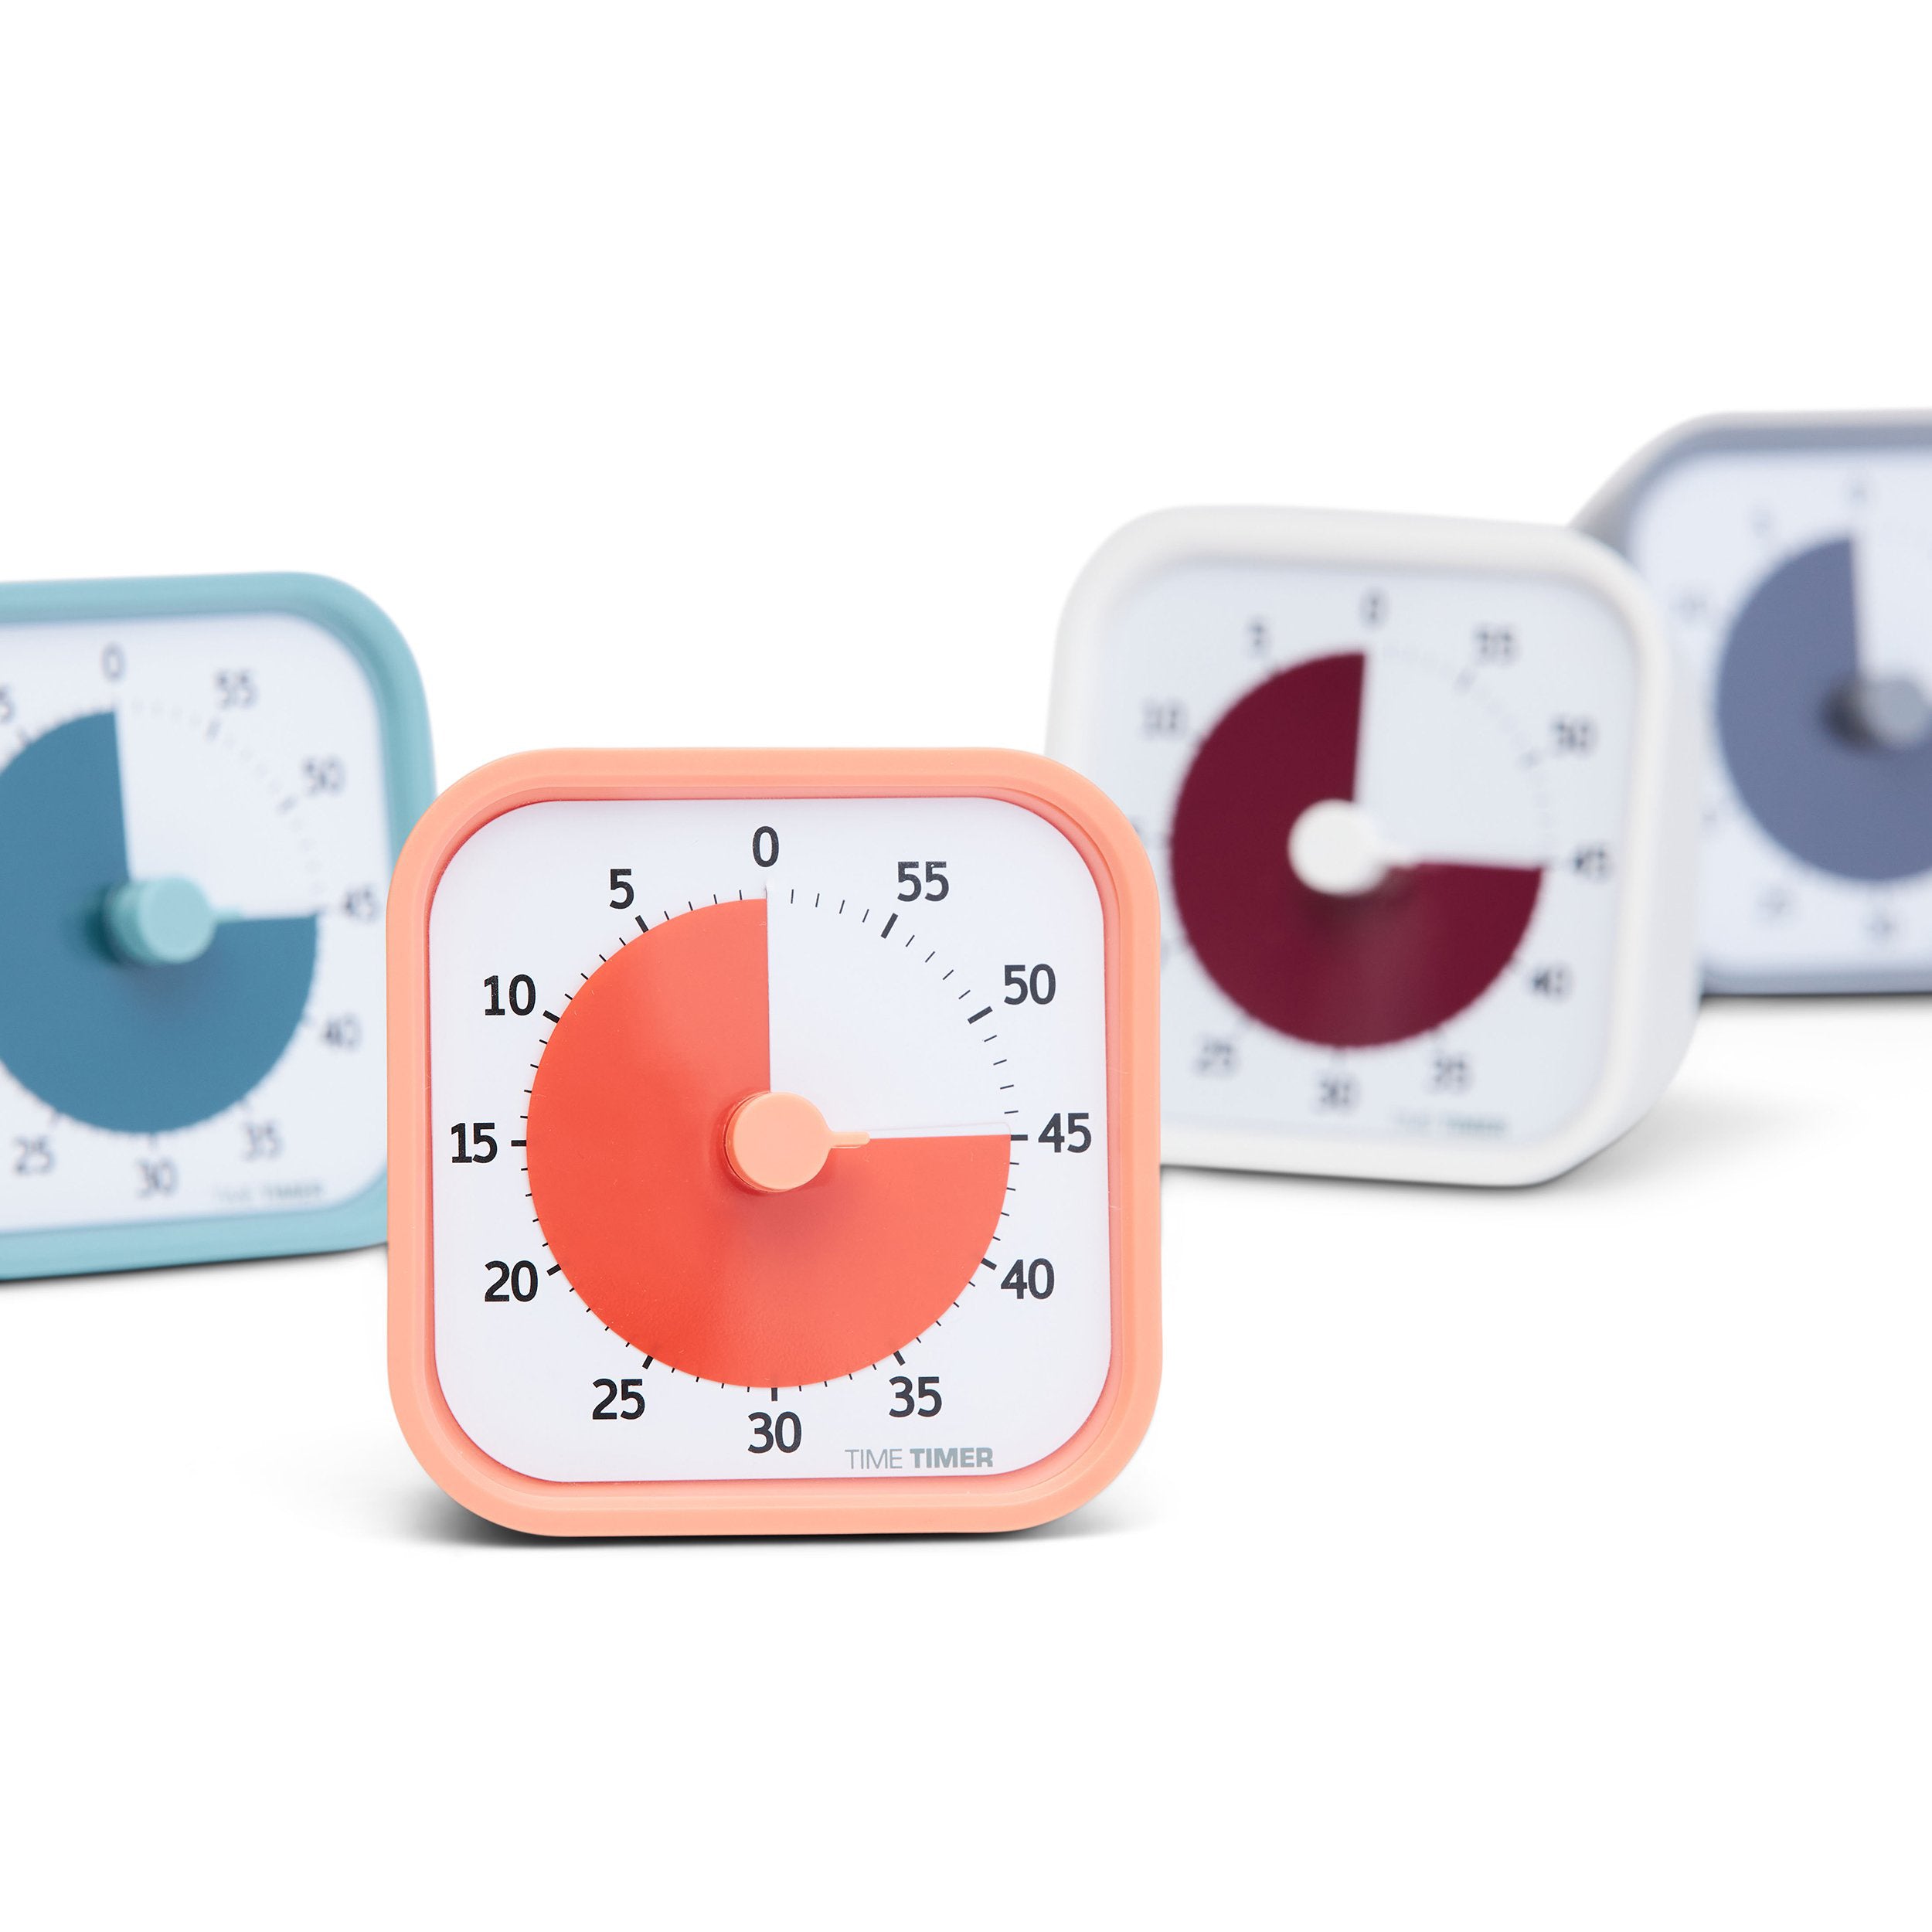 time-timer-mod-home-edition-60-minute-dreansicle-orange- (5)